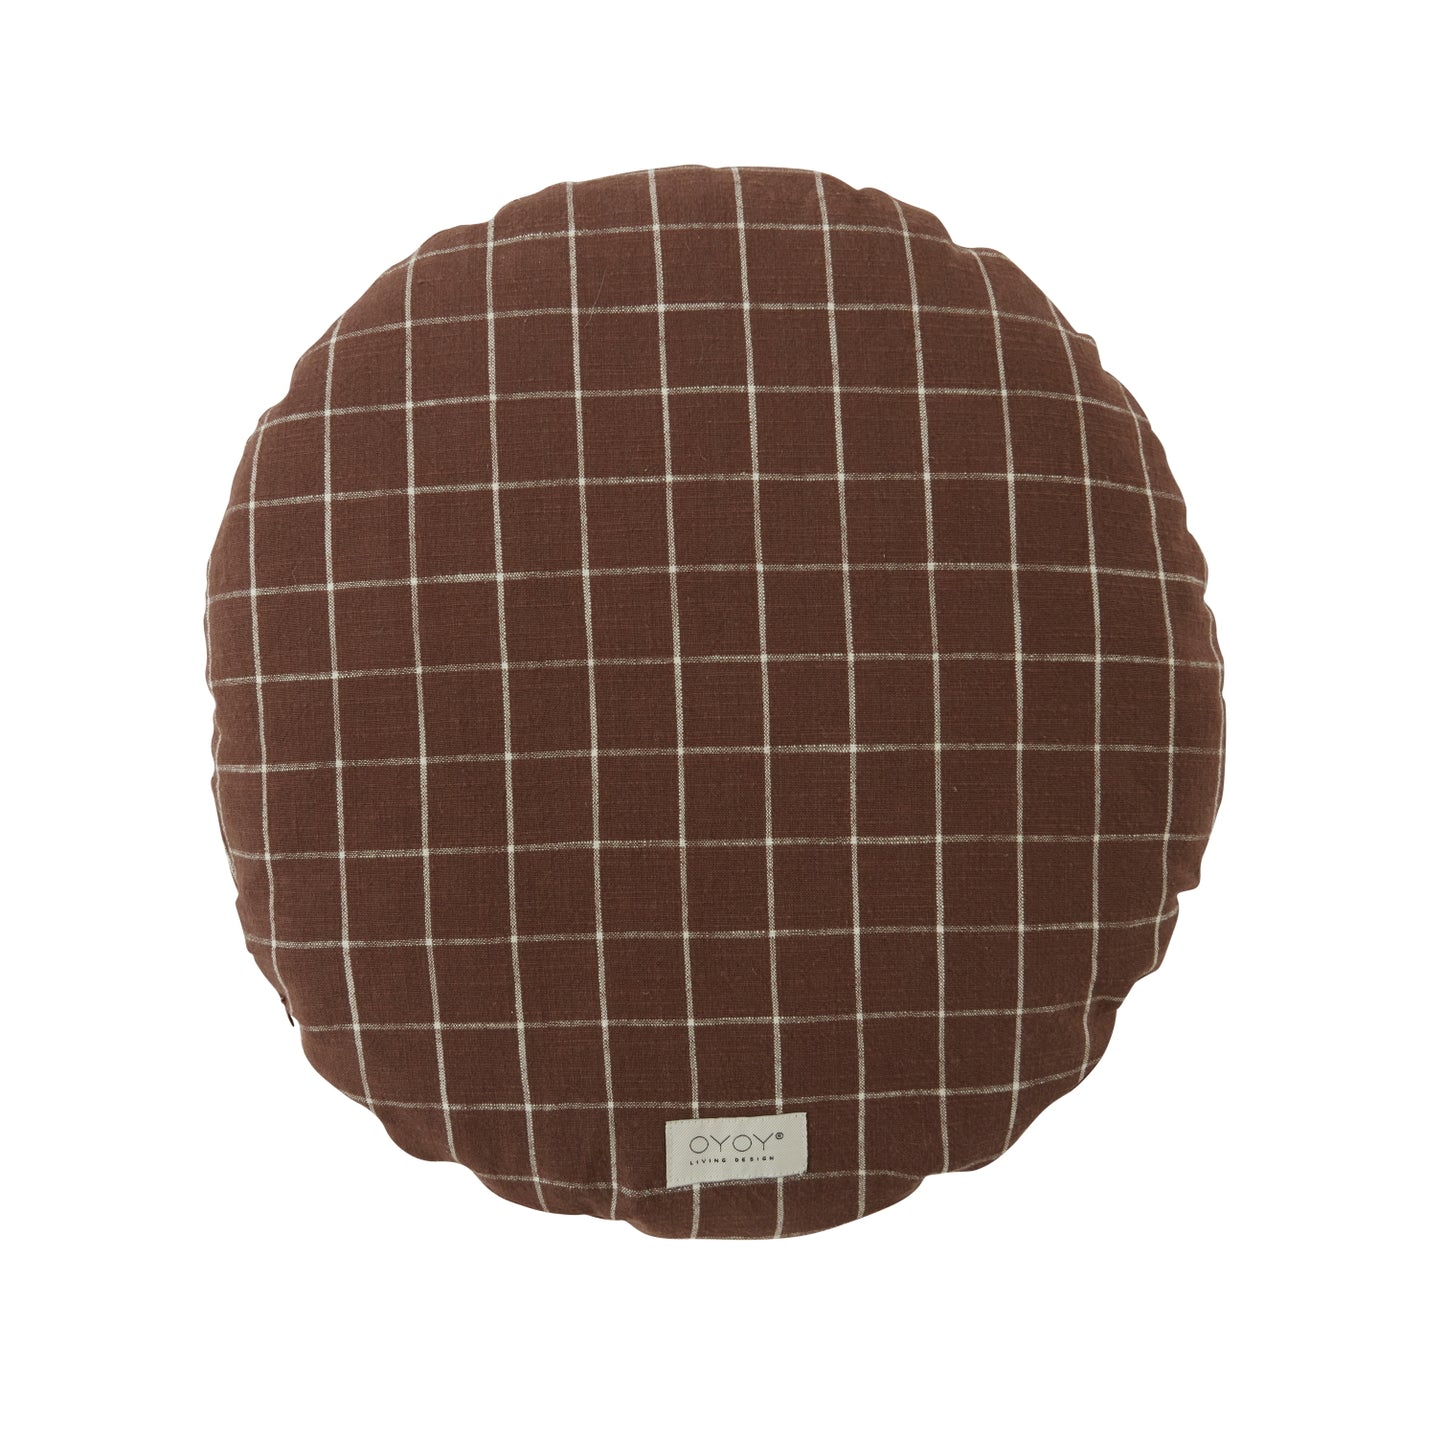 OYOY Kyoto Cushion Round Large Brown